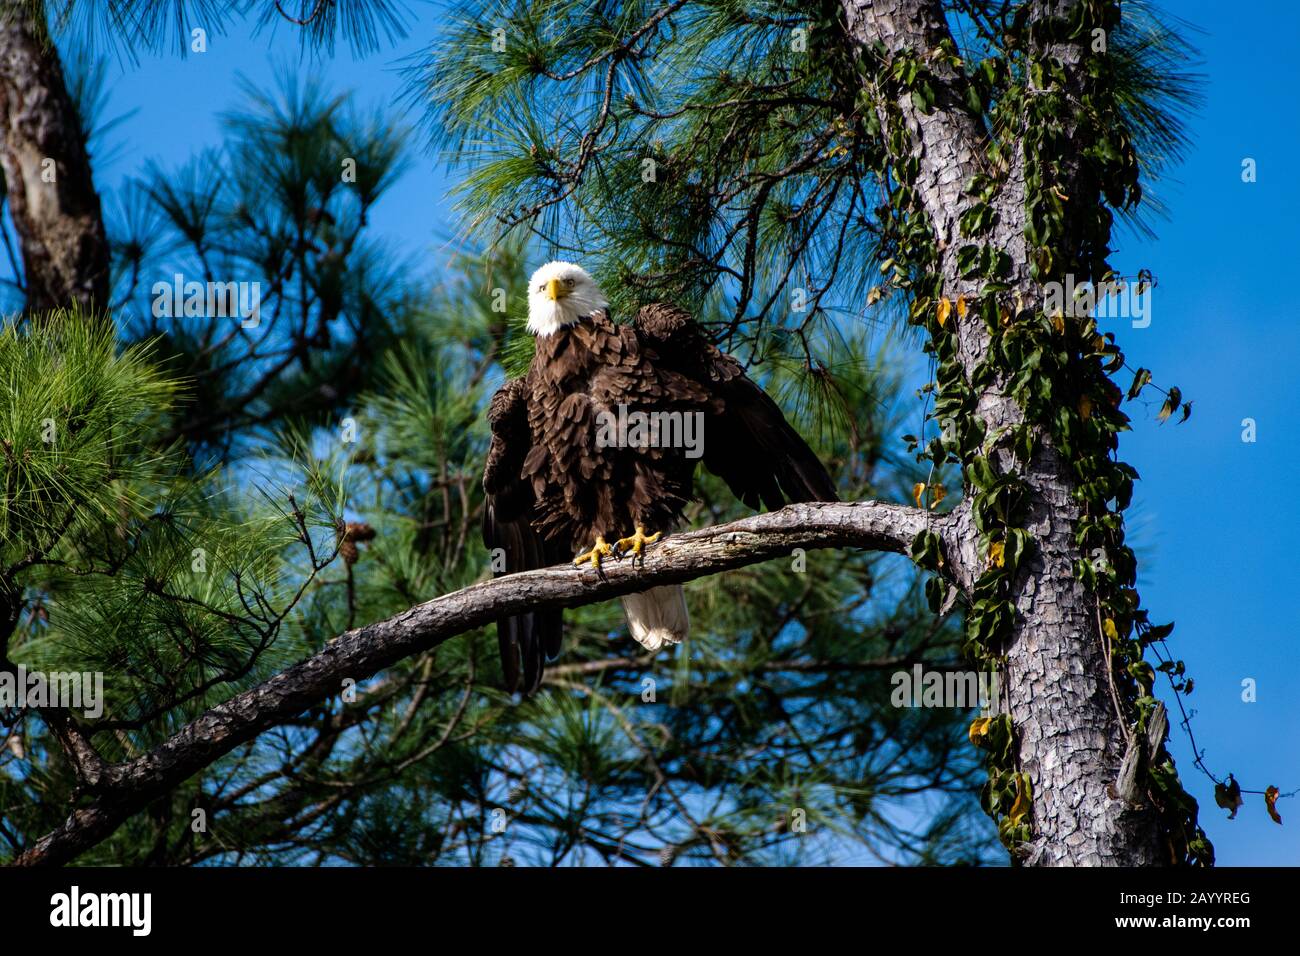 Eagle with feathers all ruffled up Stock Photo